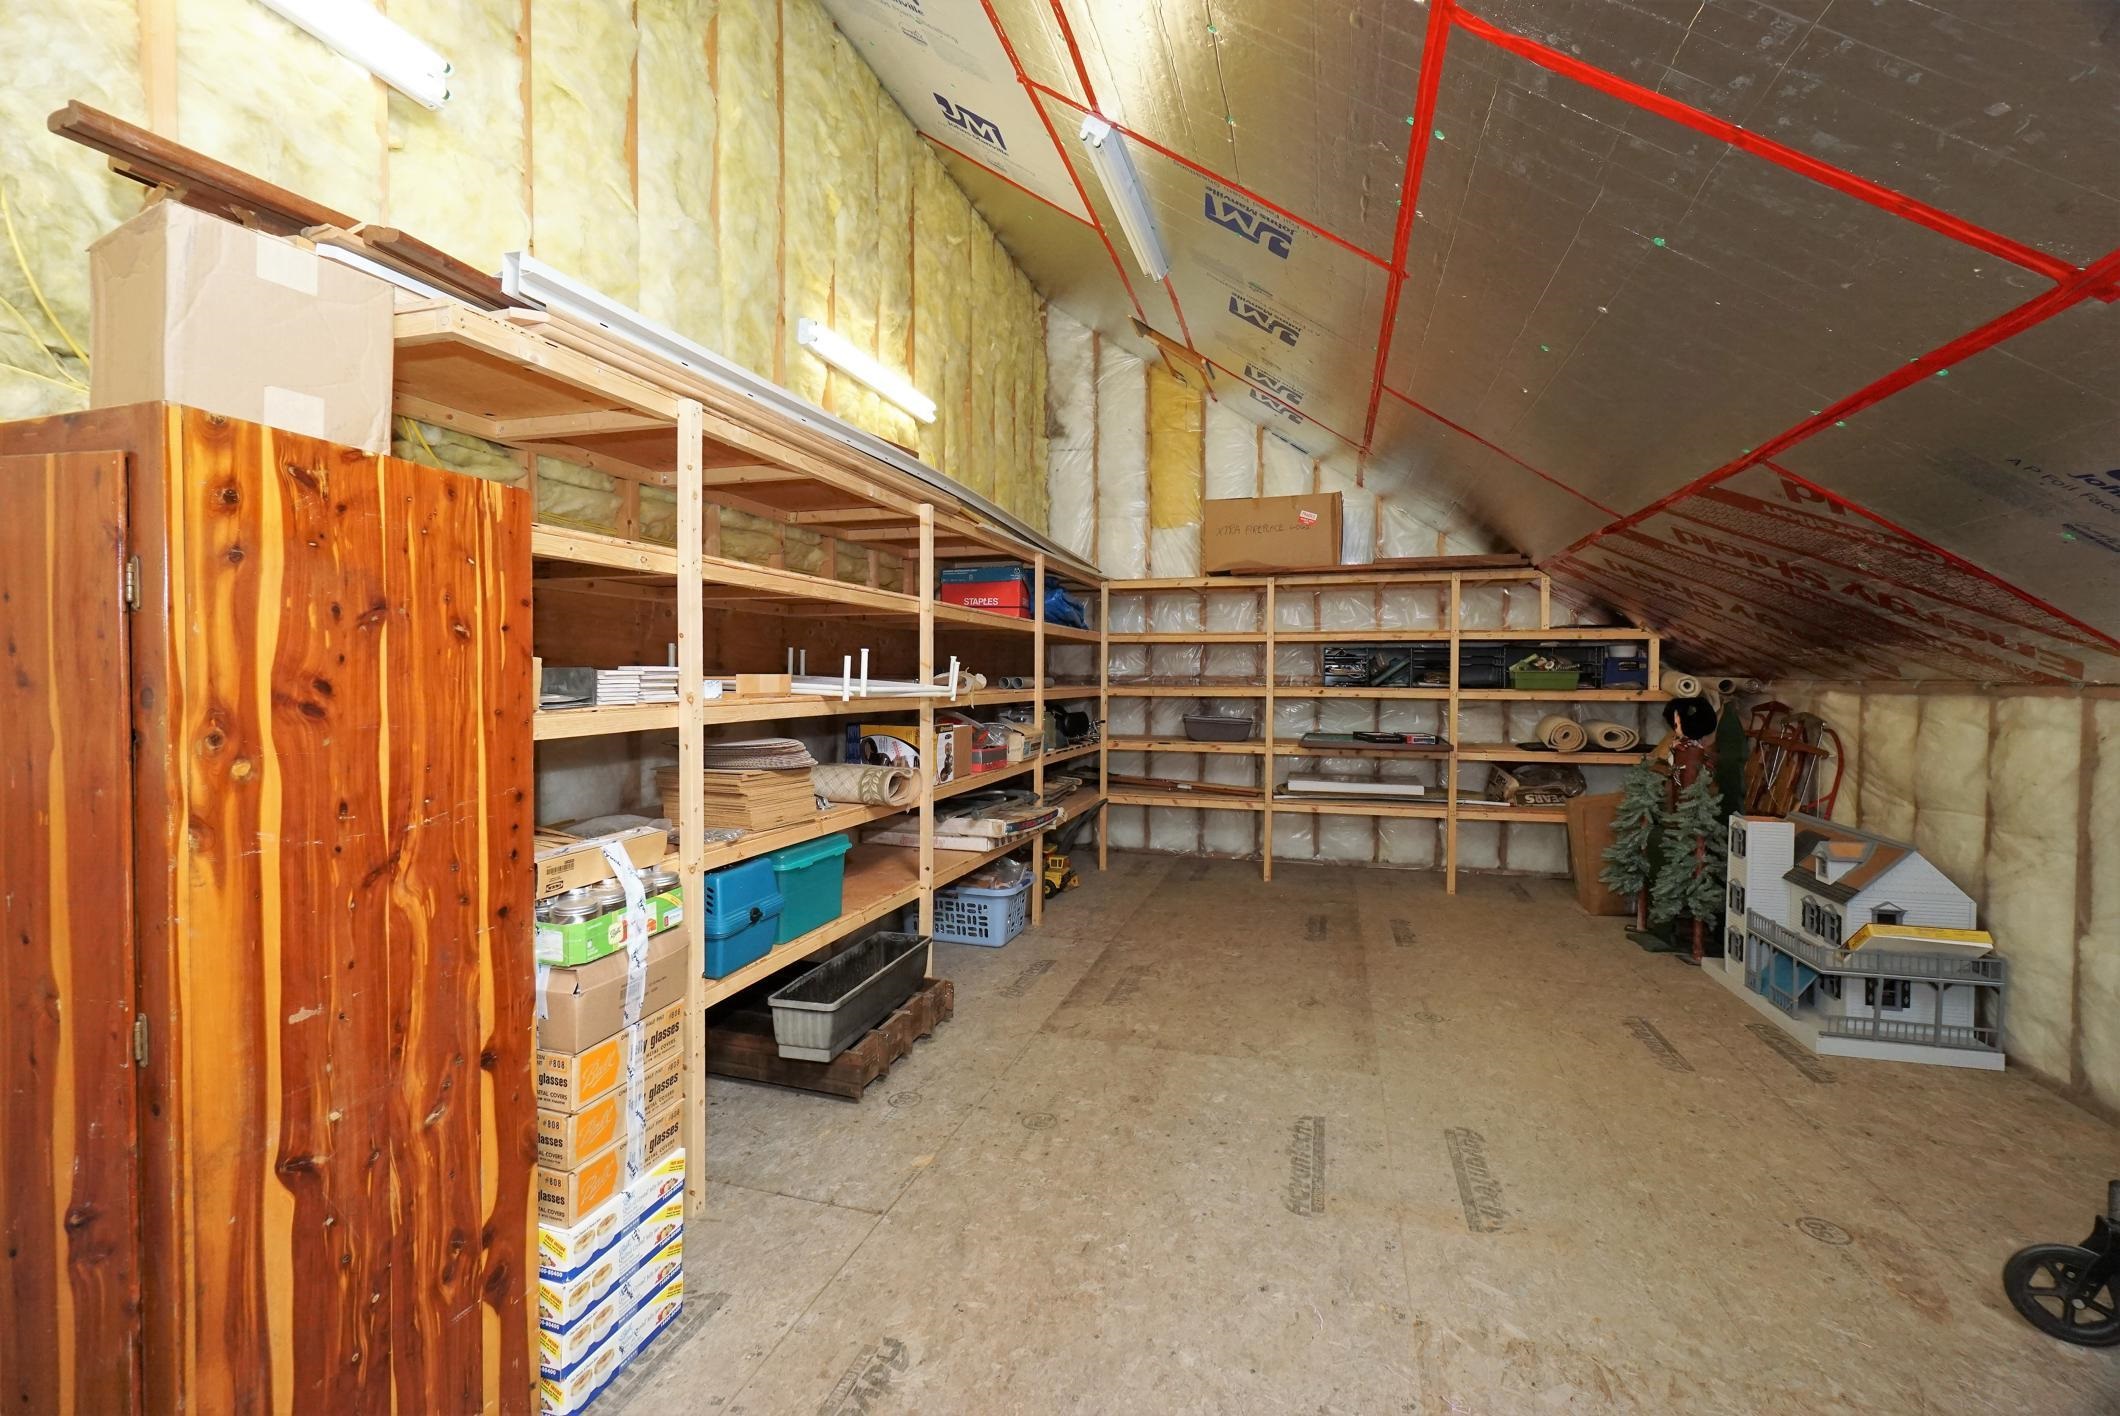 Storage room has access from the 2 bay garage and is located over the single bay garage.